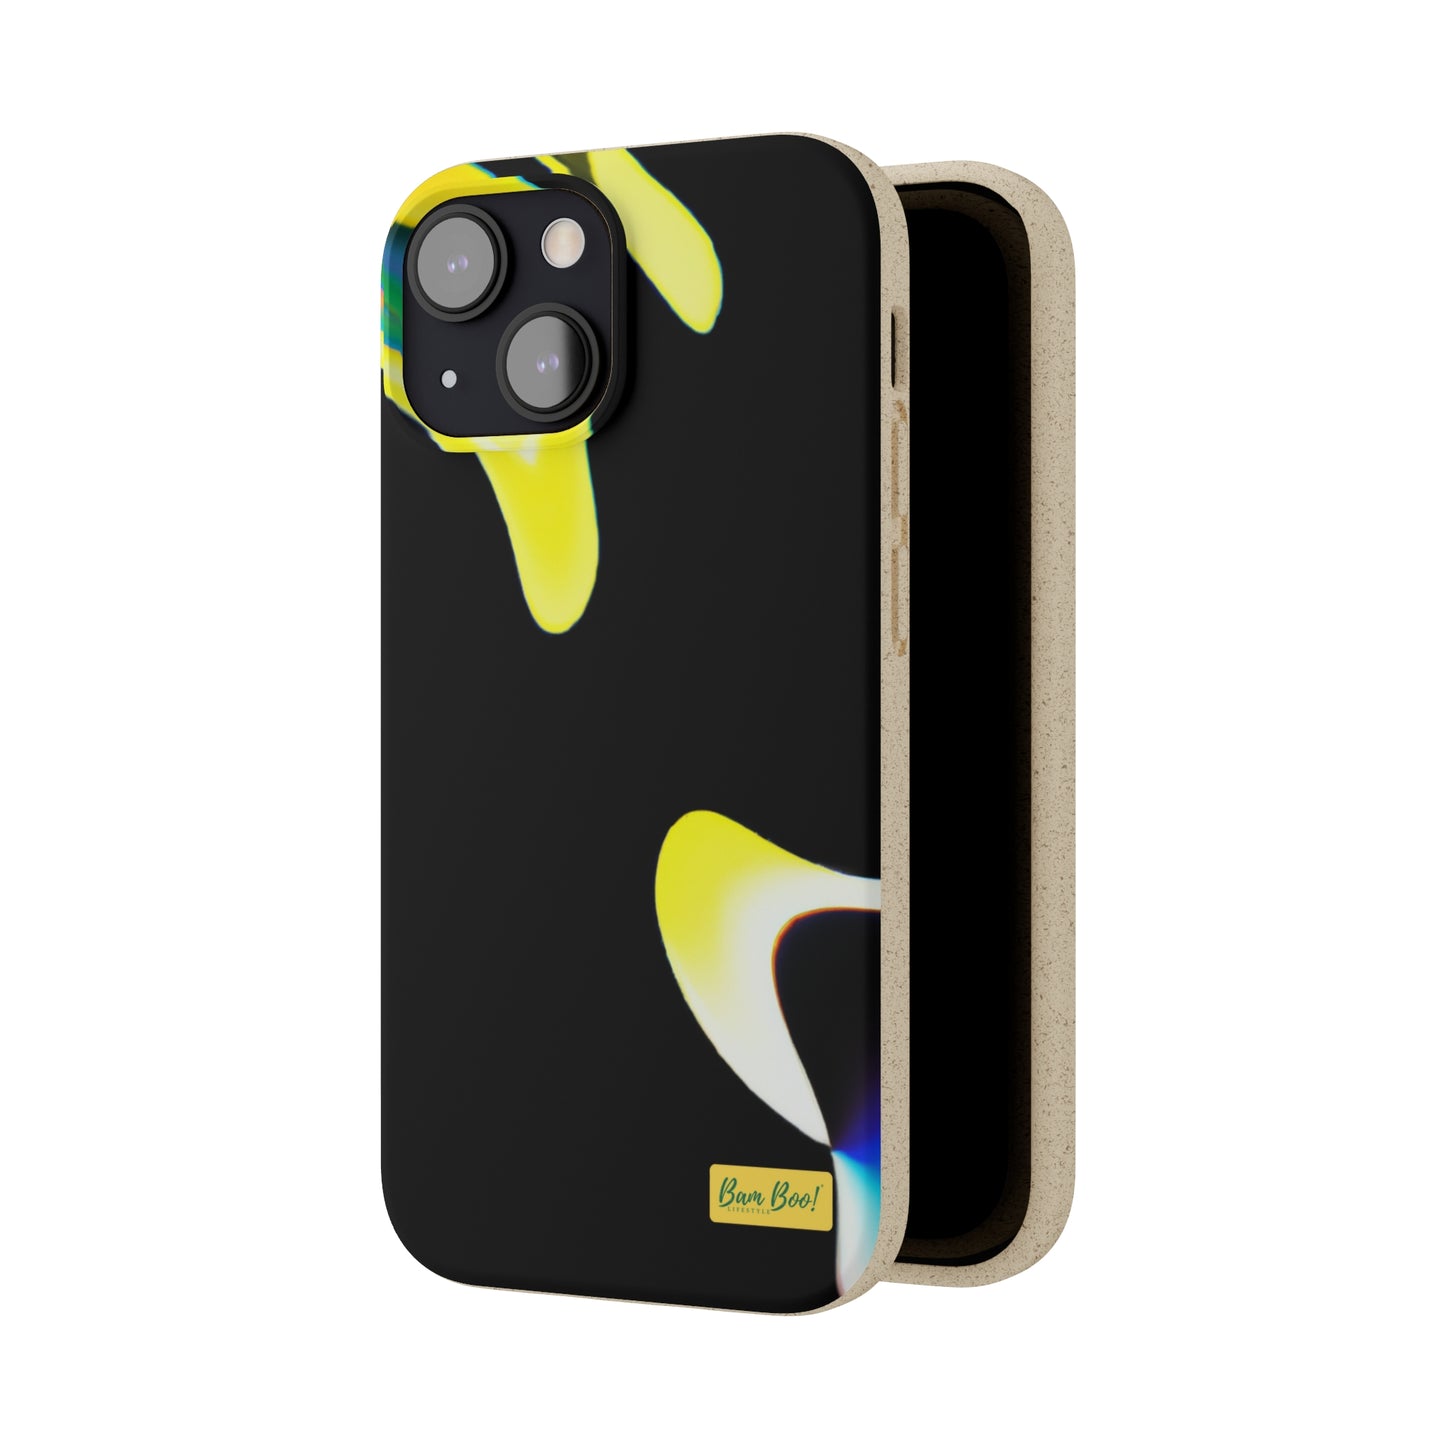 "Dynamic Motion: Capturing Movement Through Abstract Art." - Bam Boo! Lifestyle Eco-friendly Cases